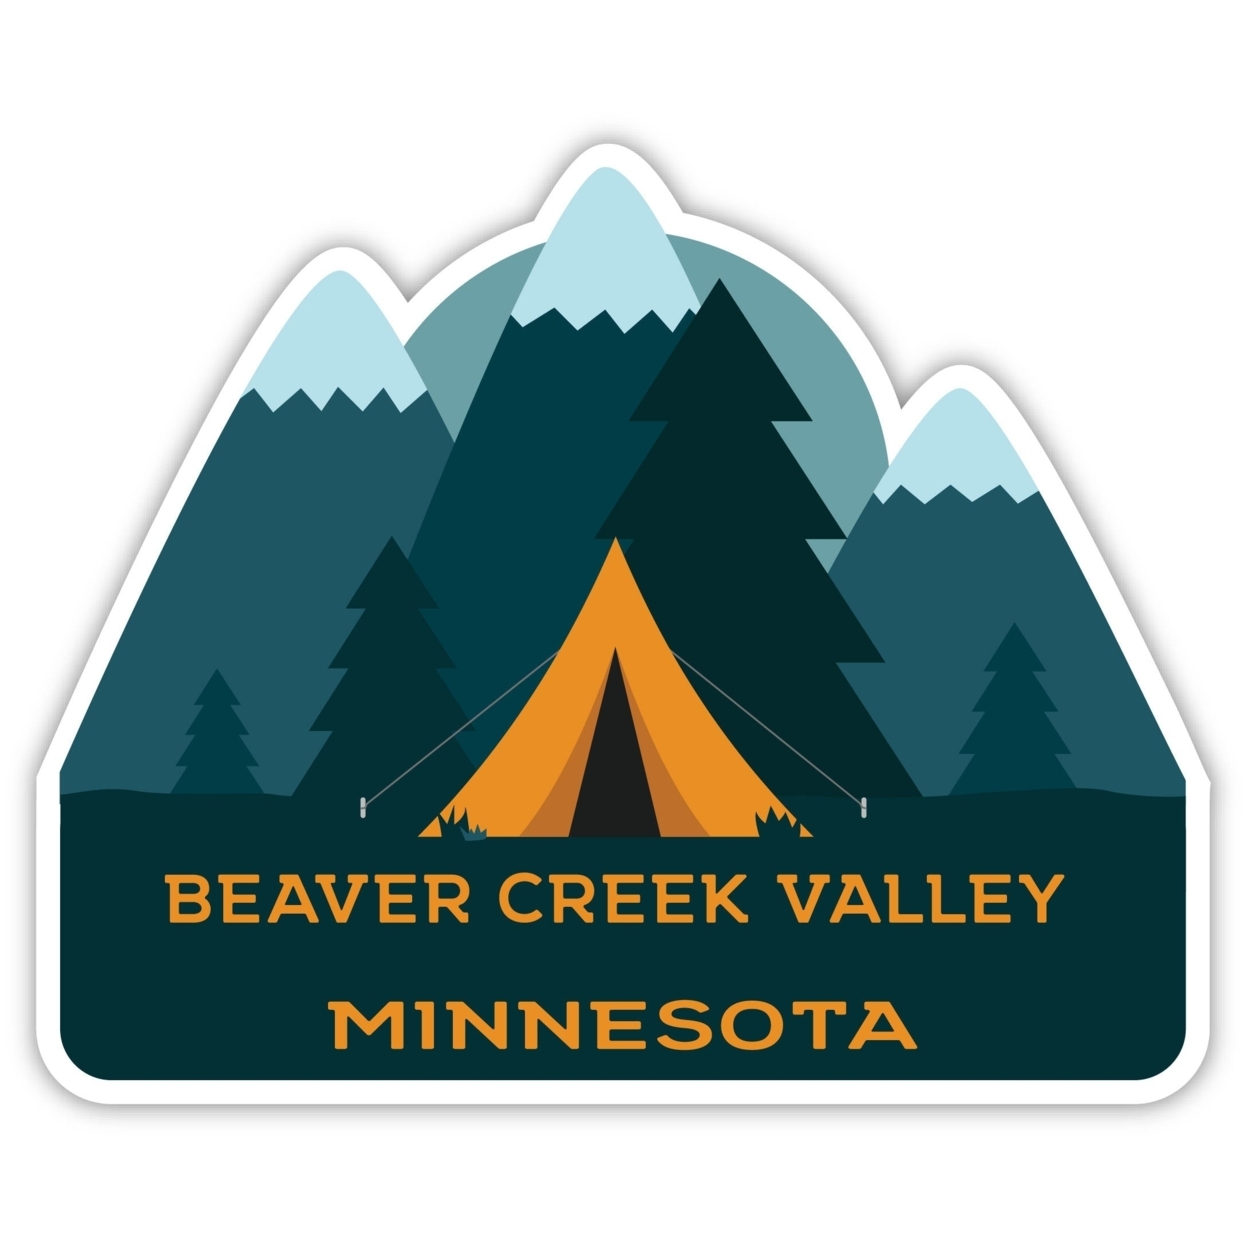 Beaver Creek Valley Minnesota Souvenir Decorative Stickers (Choose Theme And Size) - 4-Pack, 6-Inch, Tent